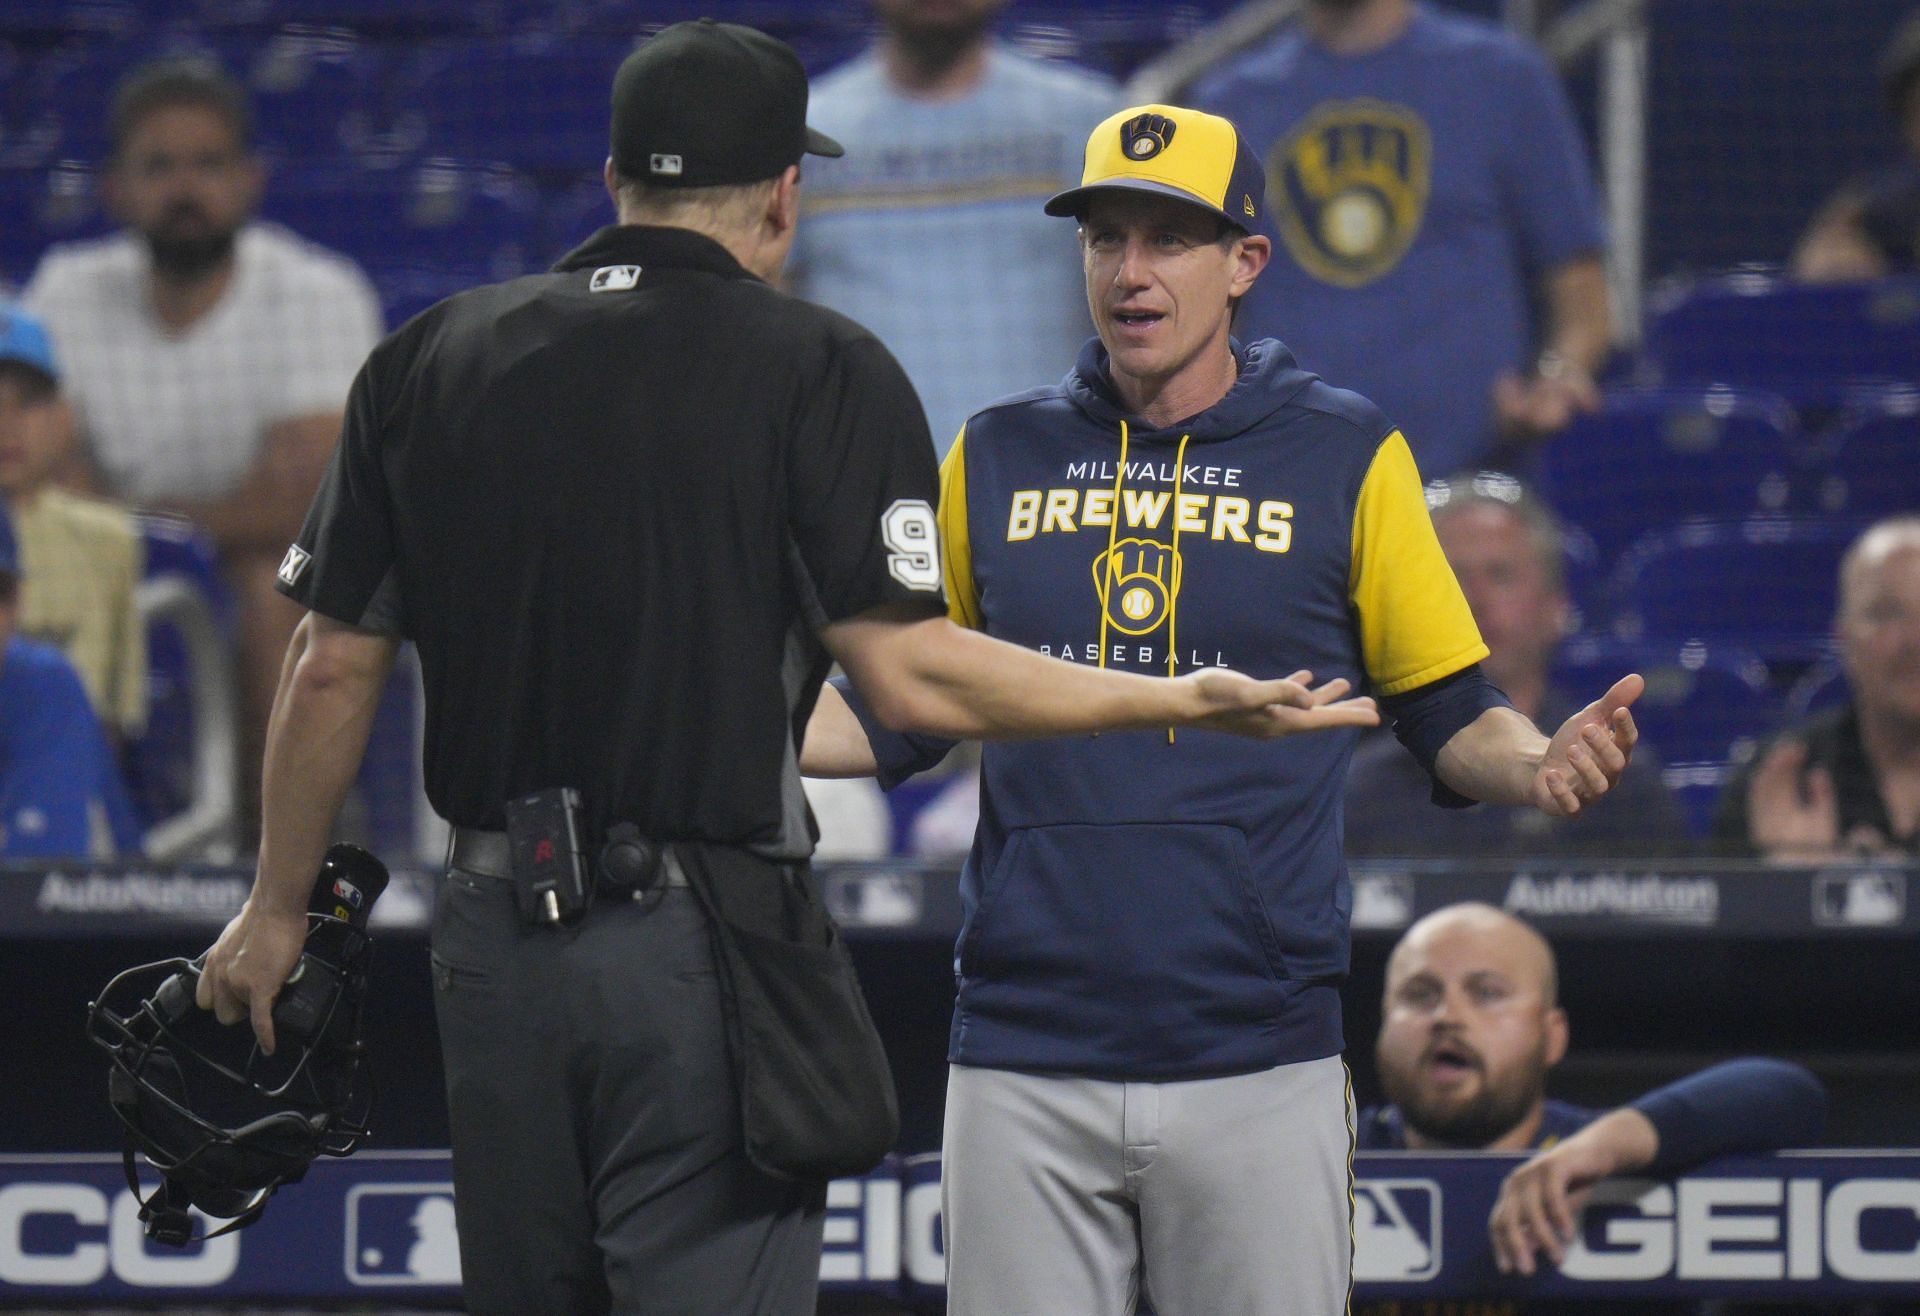 Before the new MLB replay rule managers had more time as the umpires approached them